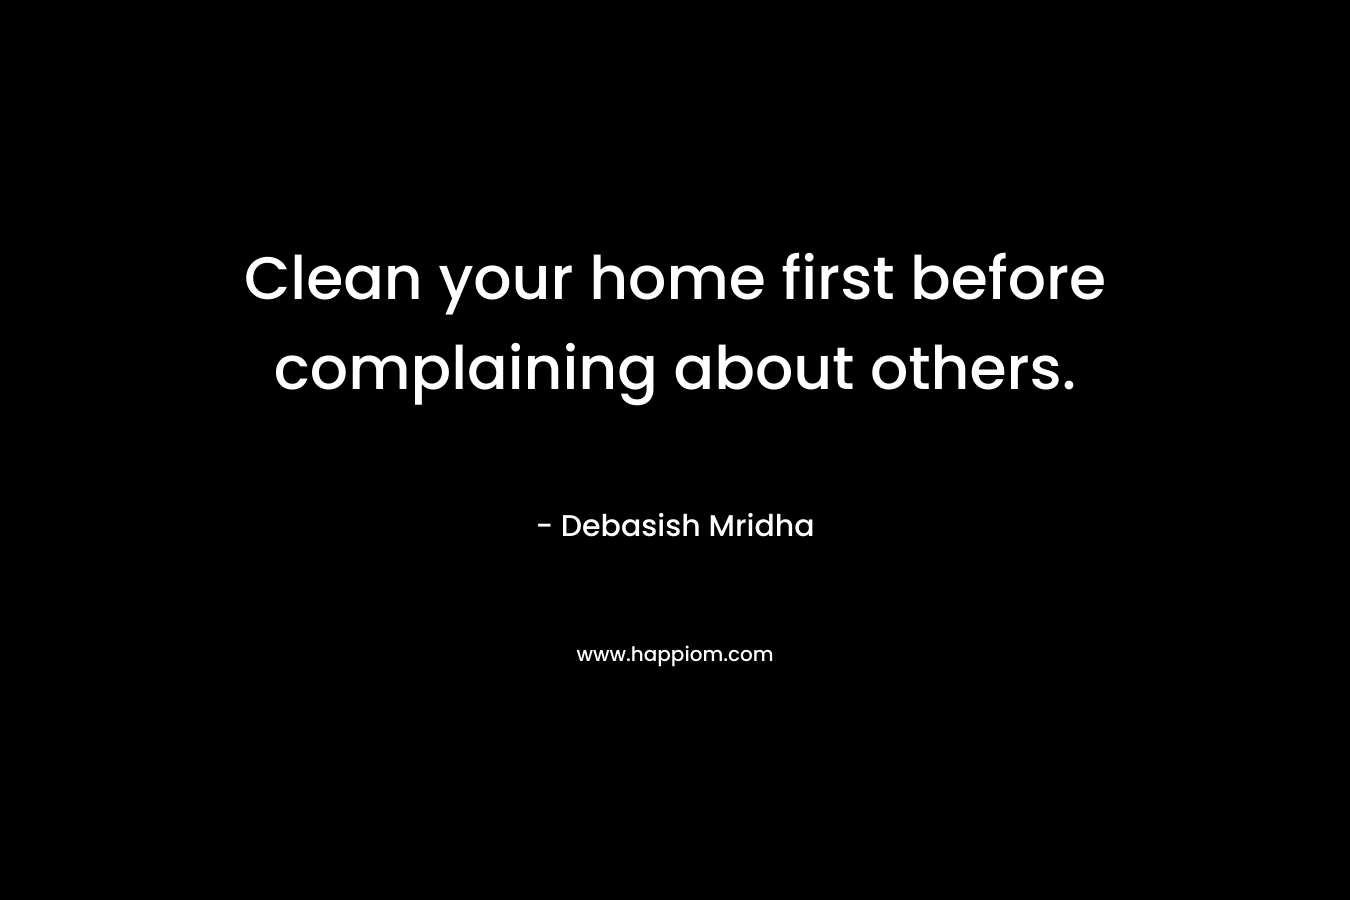 Clean your home first before complaining about others. – Debasish Mridha